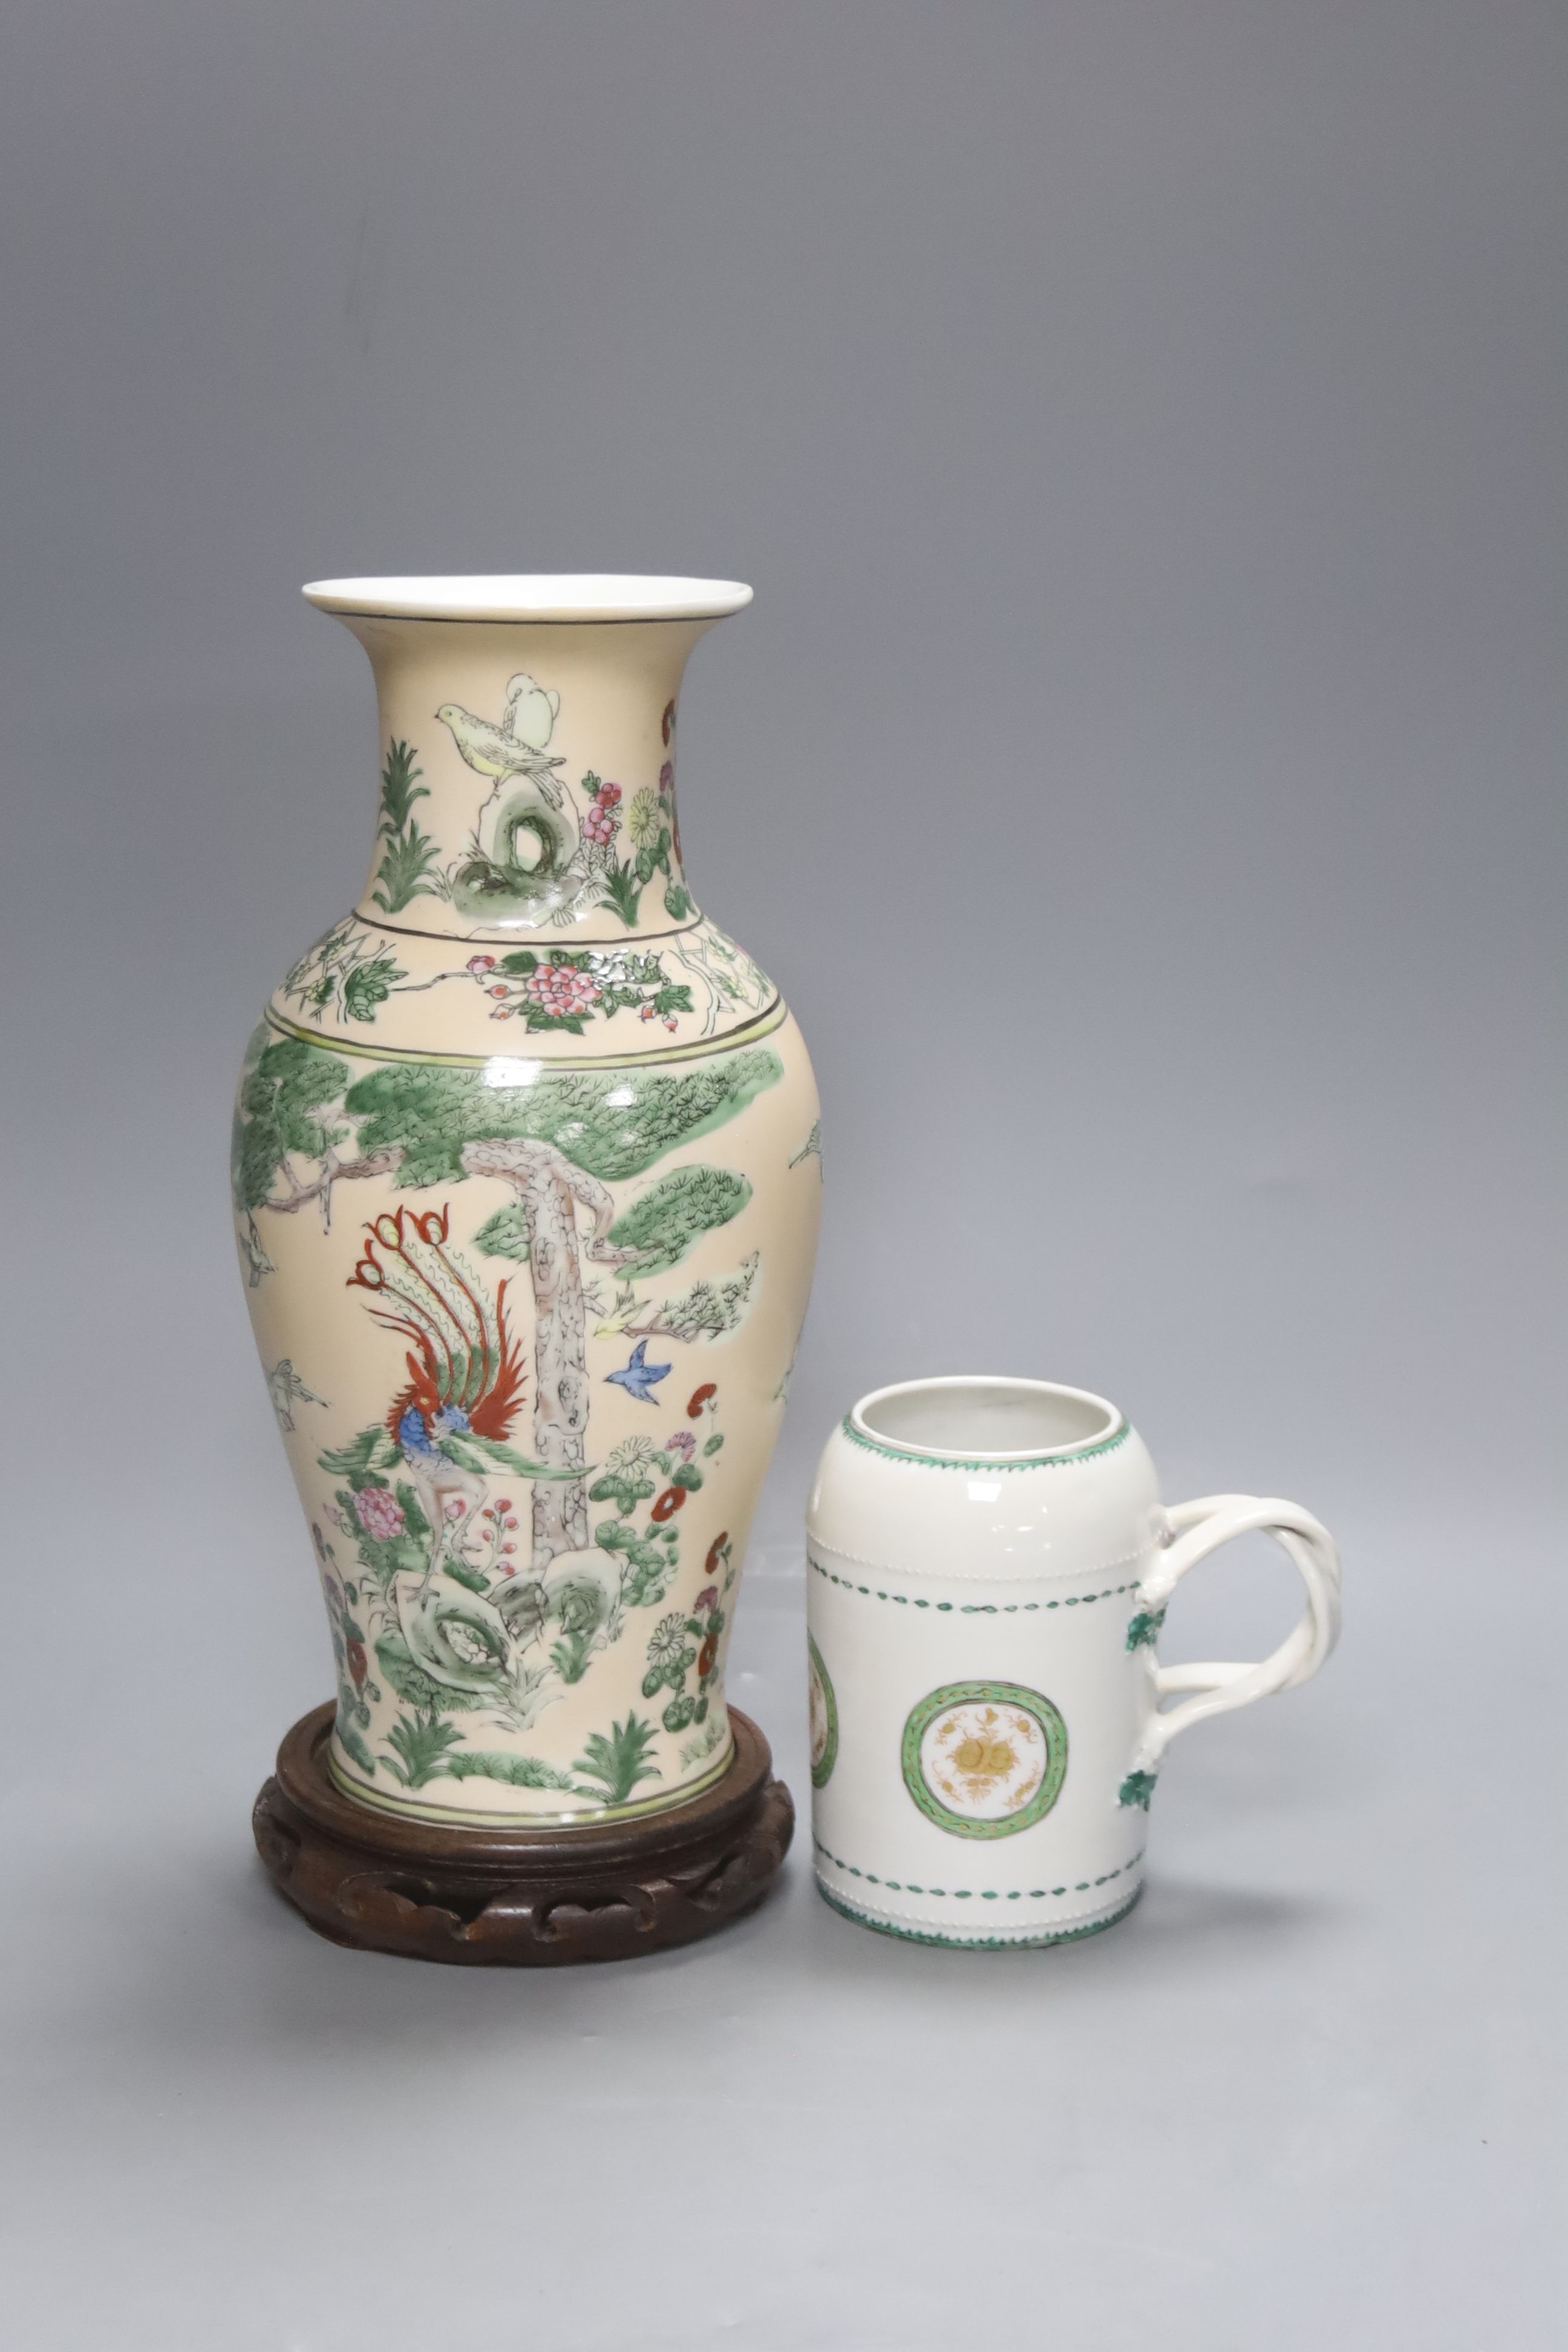 A 19th century Samson tankard (damaged) and a Japanese export vase (drilled), tallest 33cm